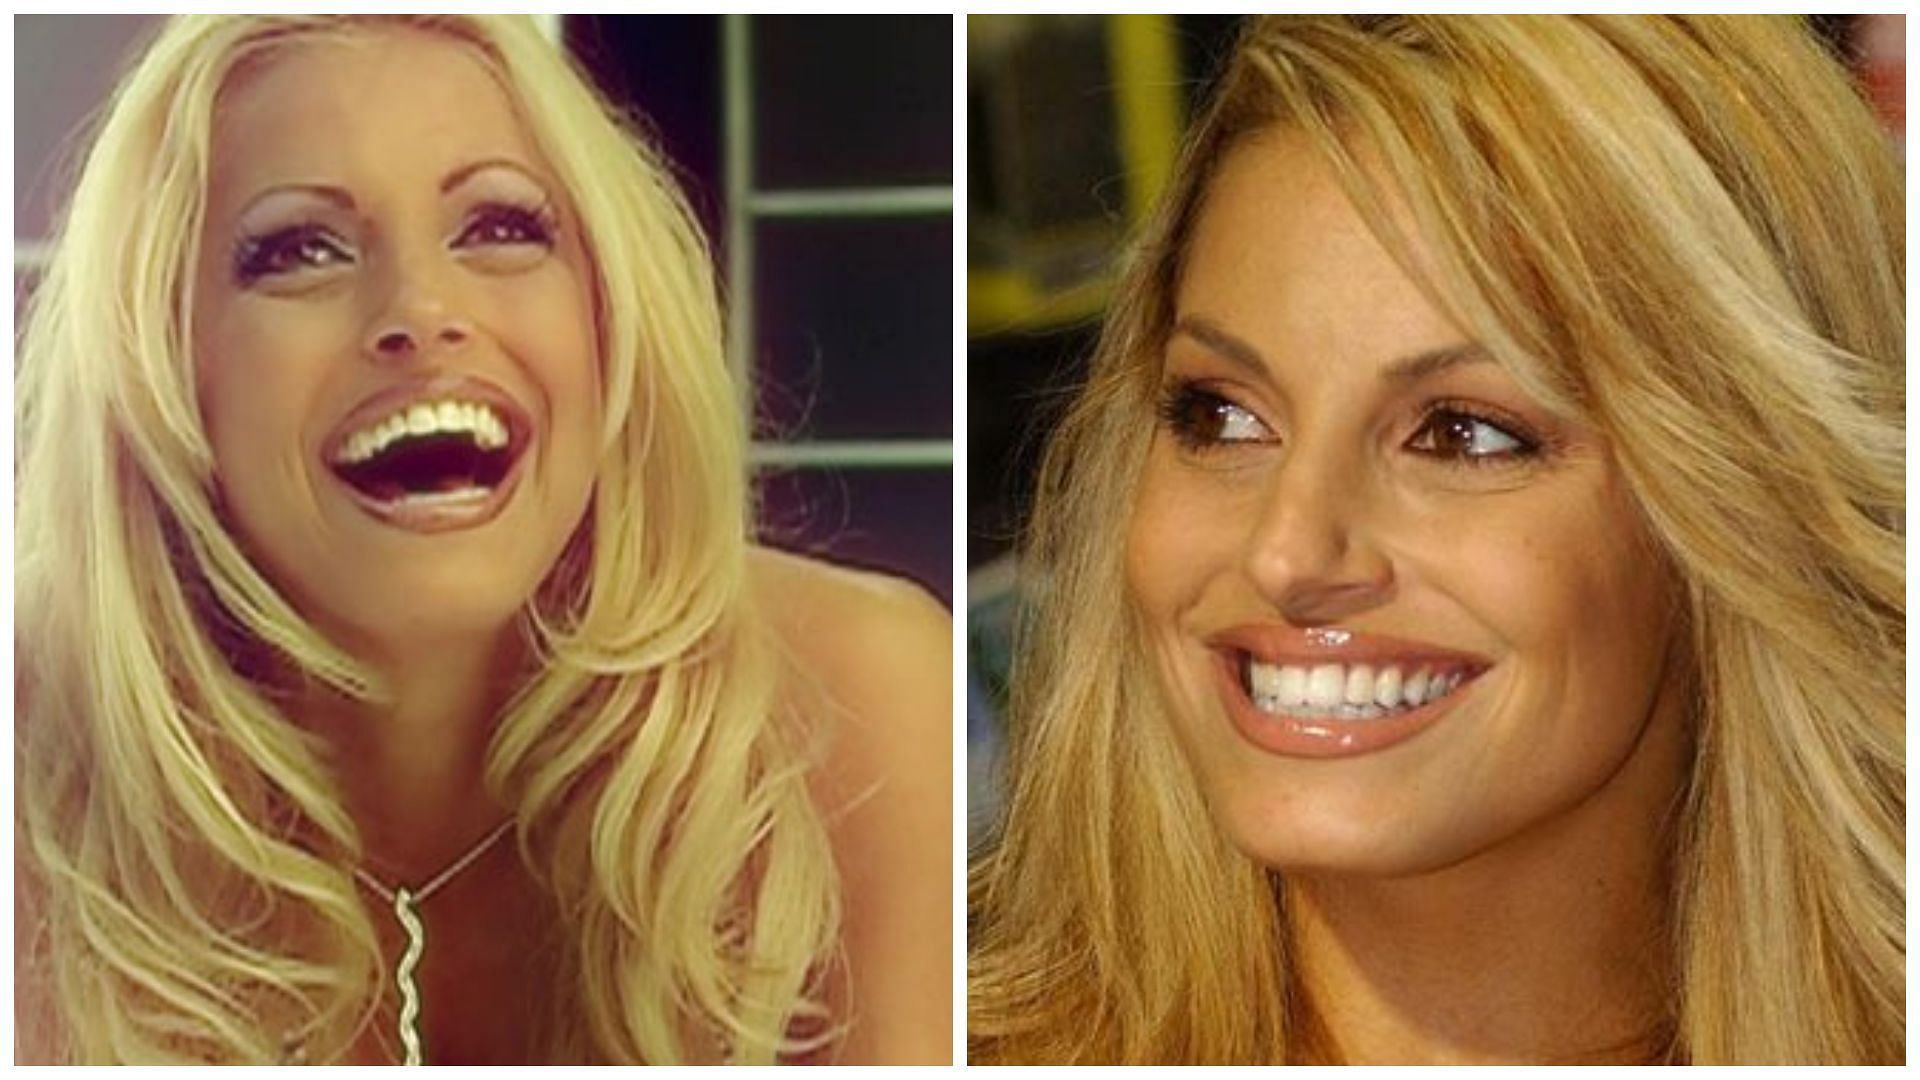 Trish Stratus is a WWE Hall of Famer.